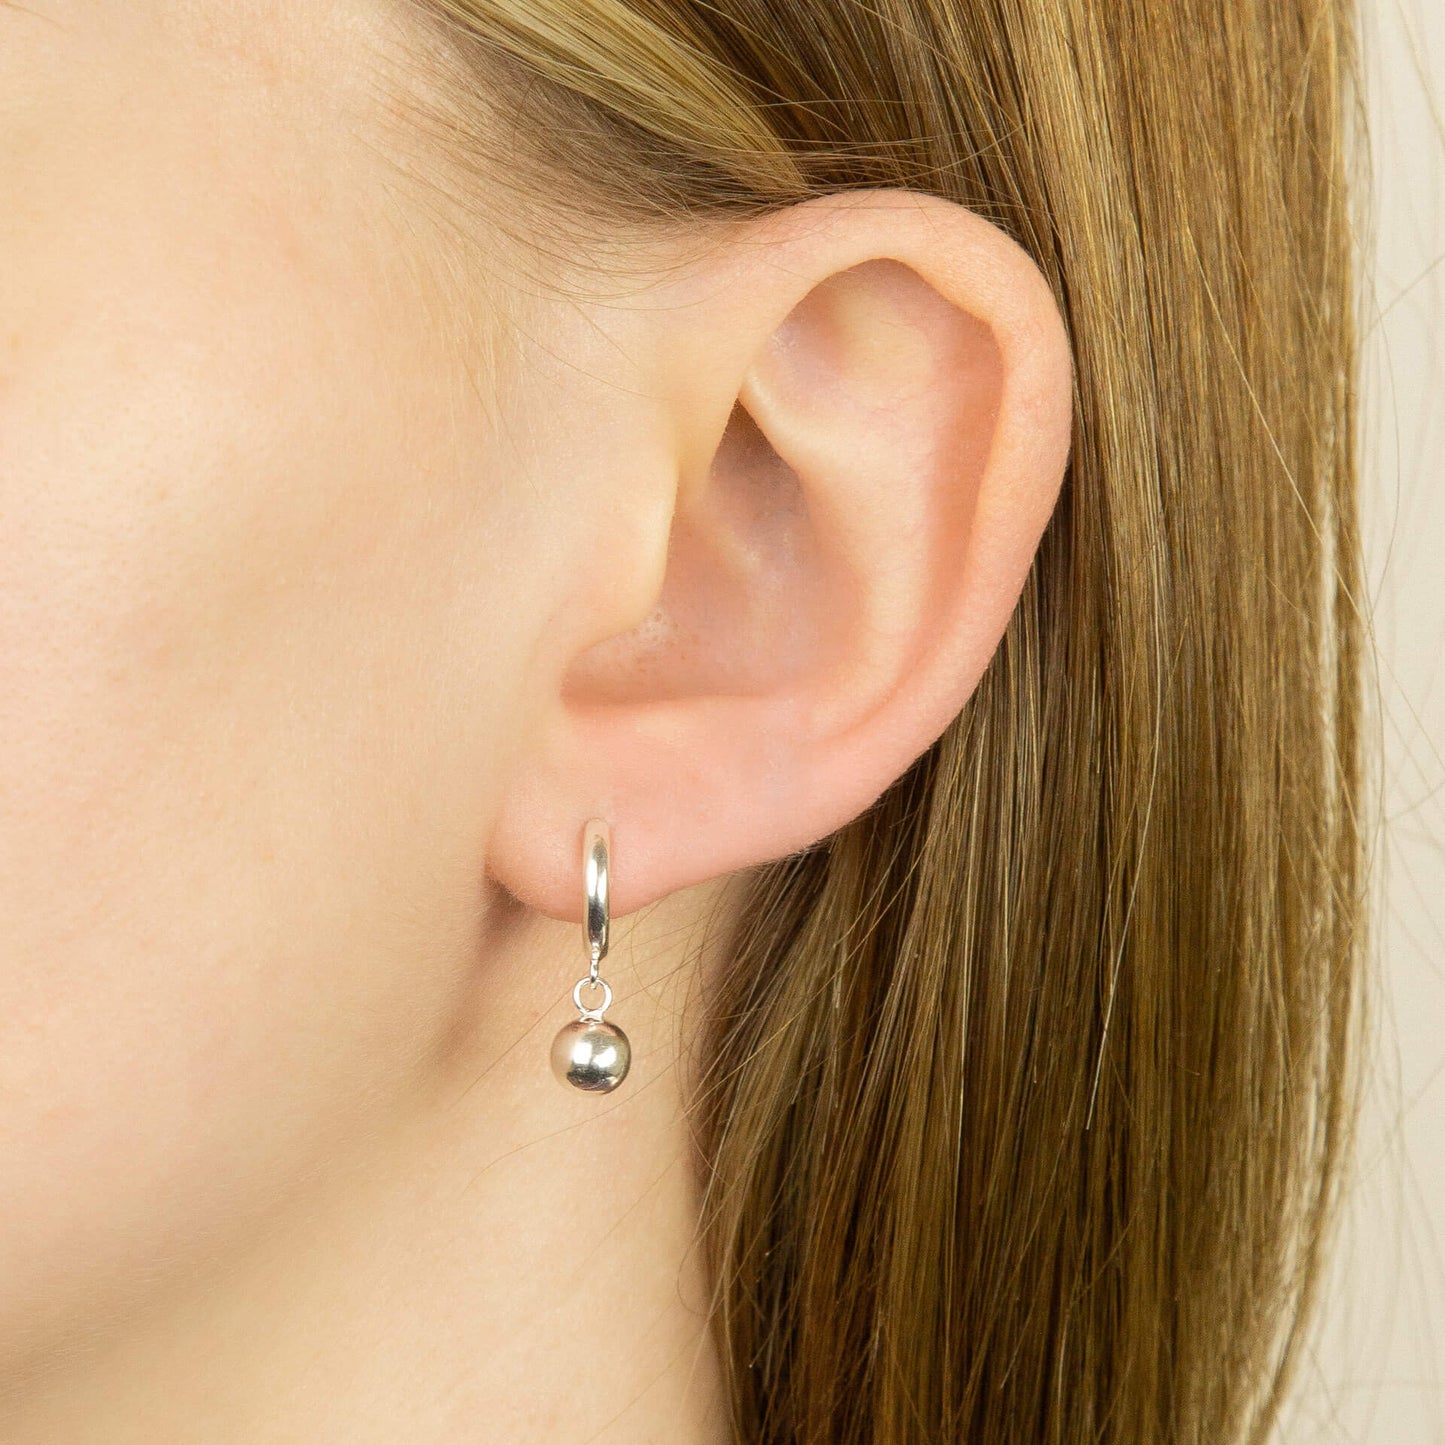 Recycled Silver Hoop Earrings With Ball Charm